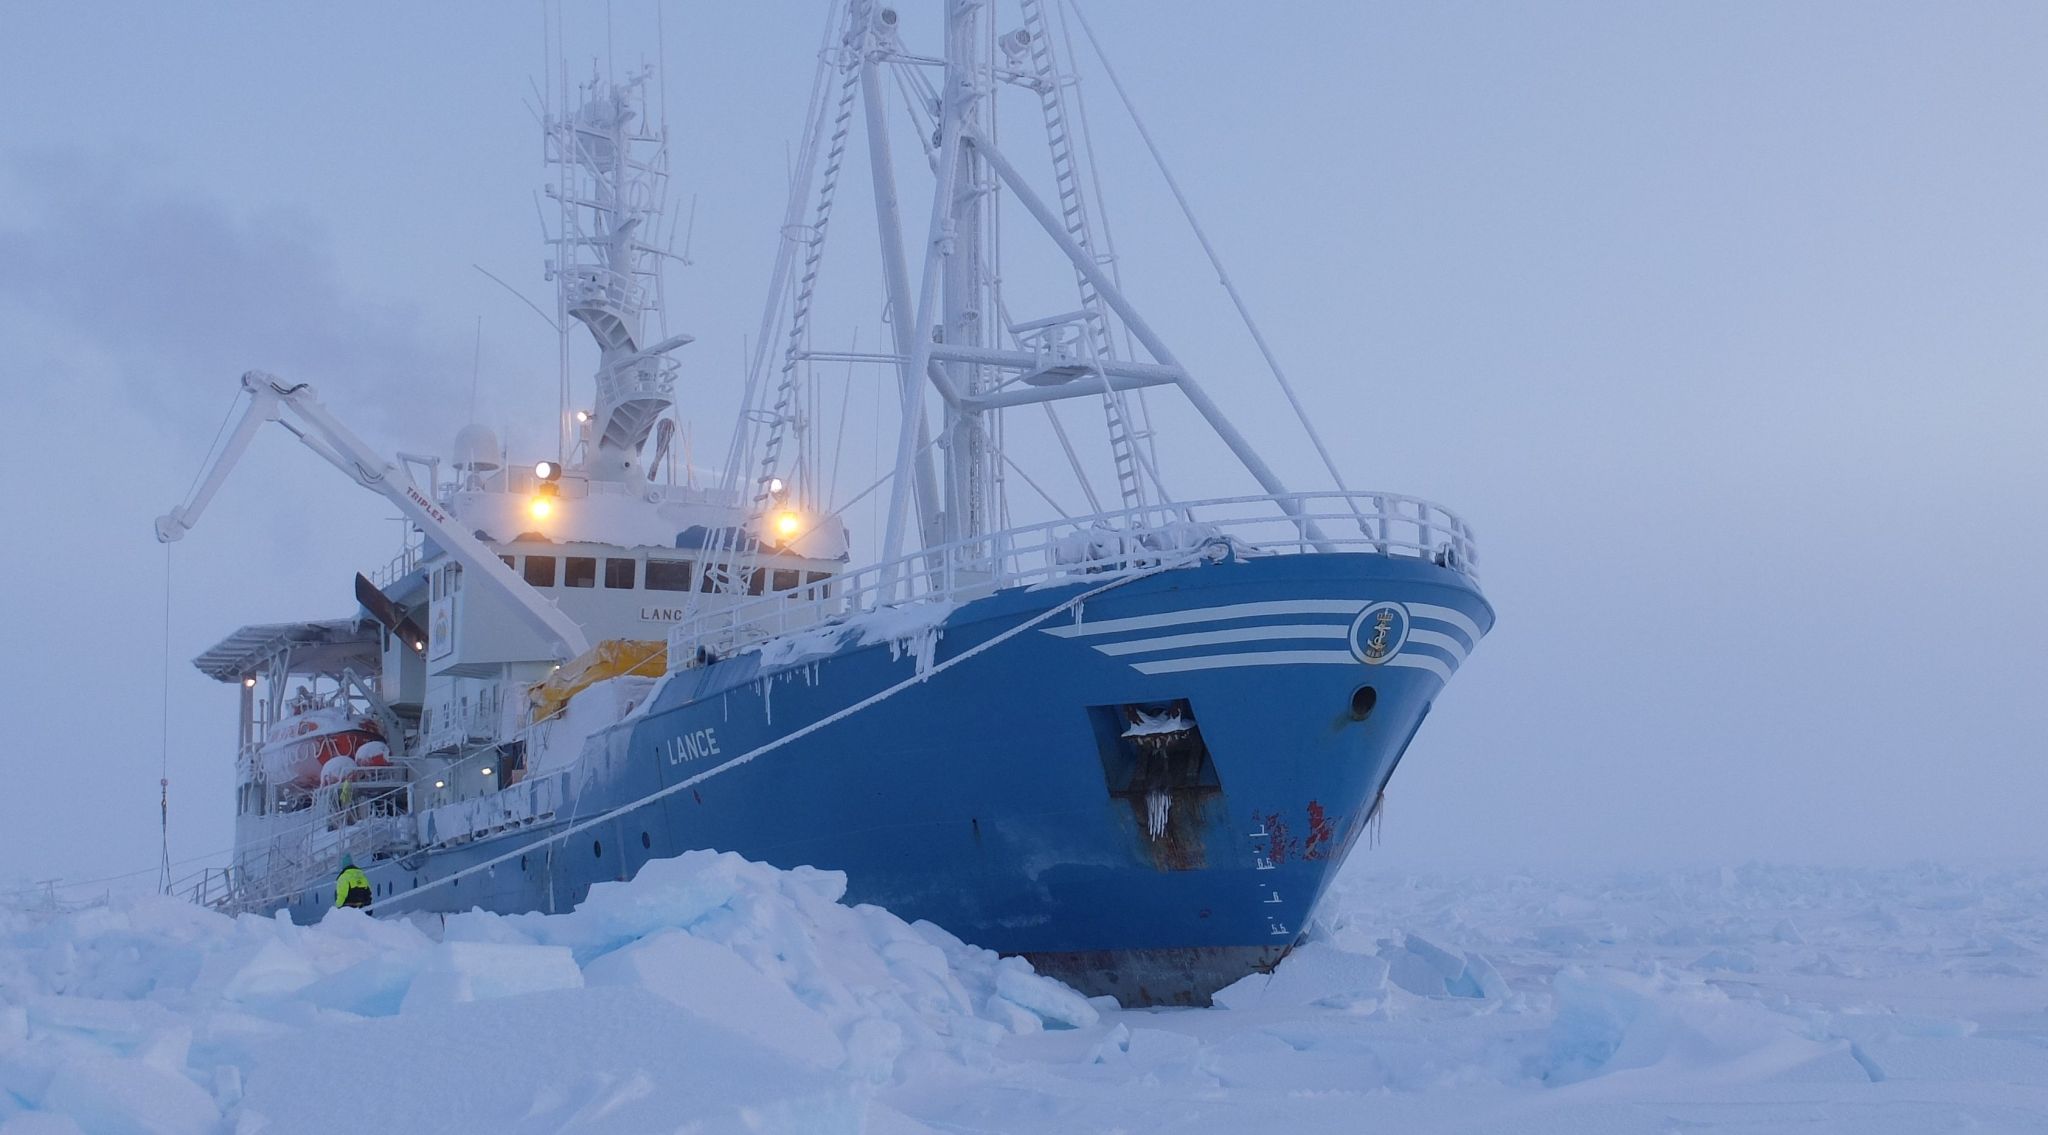 The Norwegian research vessel R/V Lance, which has been locked into the Arctic sea ice pack since January 2015.